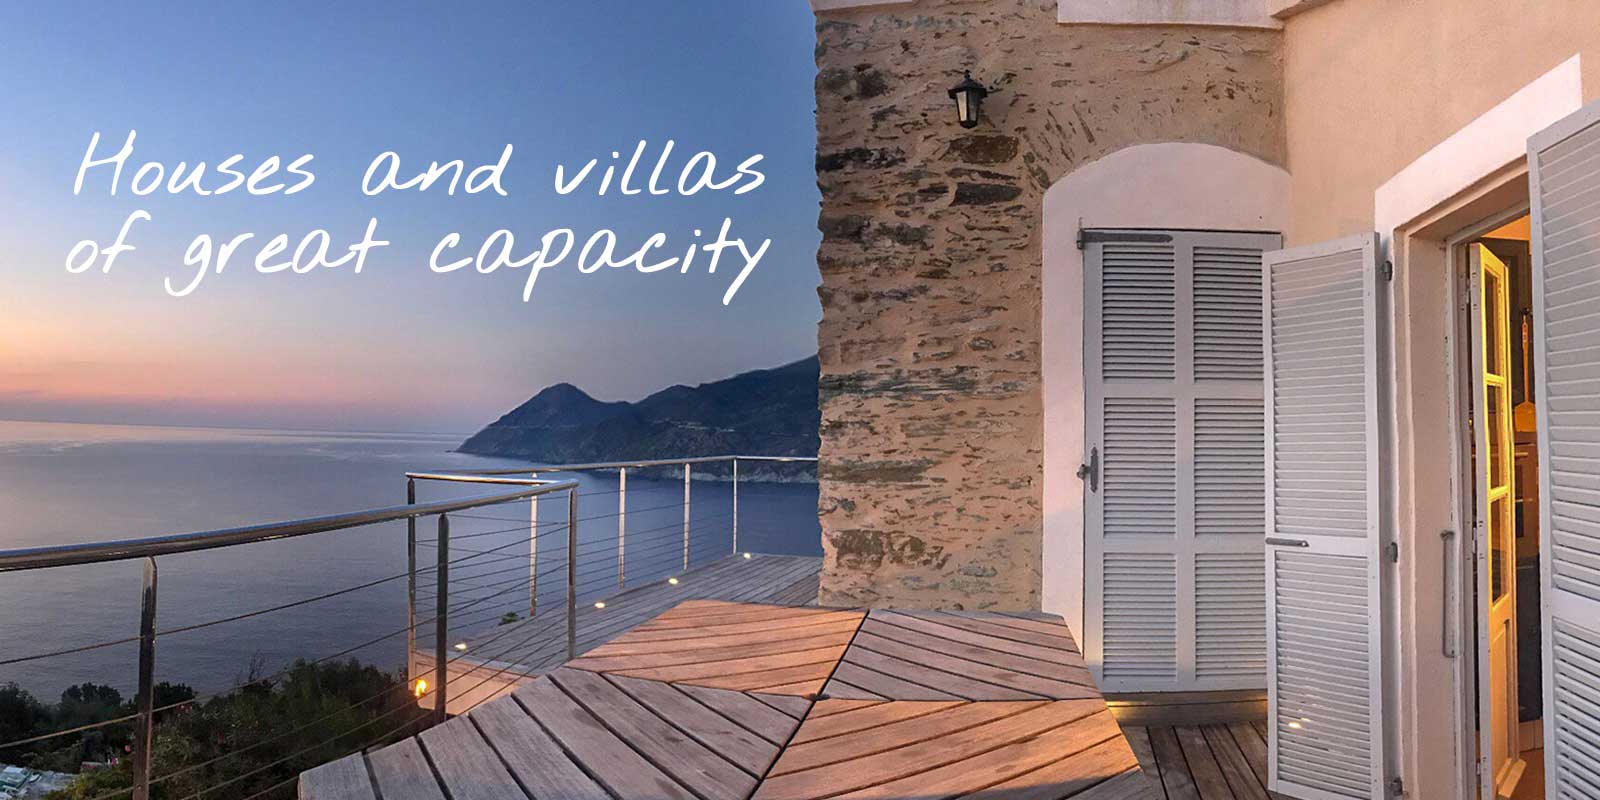 Holiday rental in Cap Corse that can accommodate more than 8 travelers